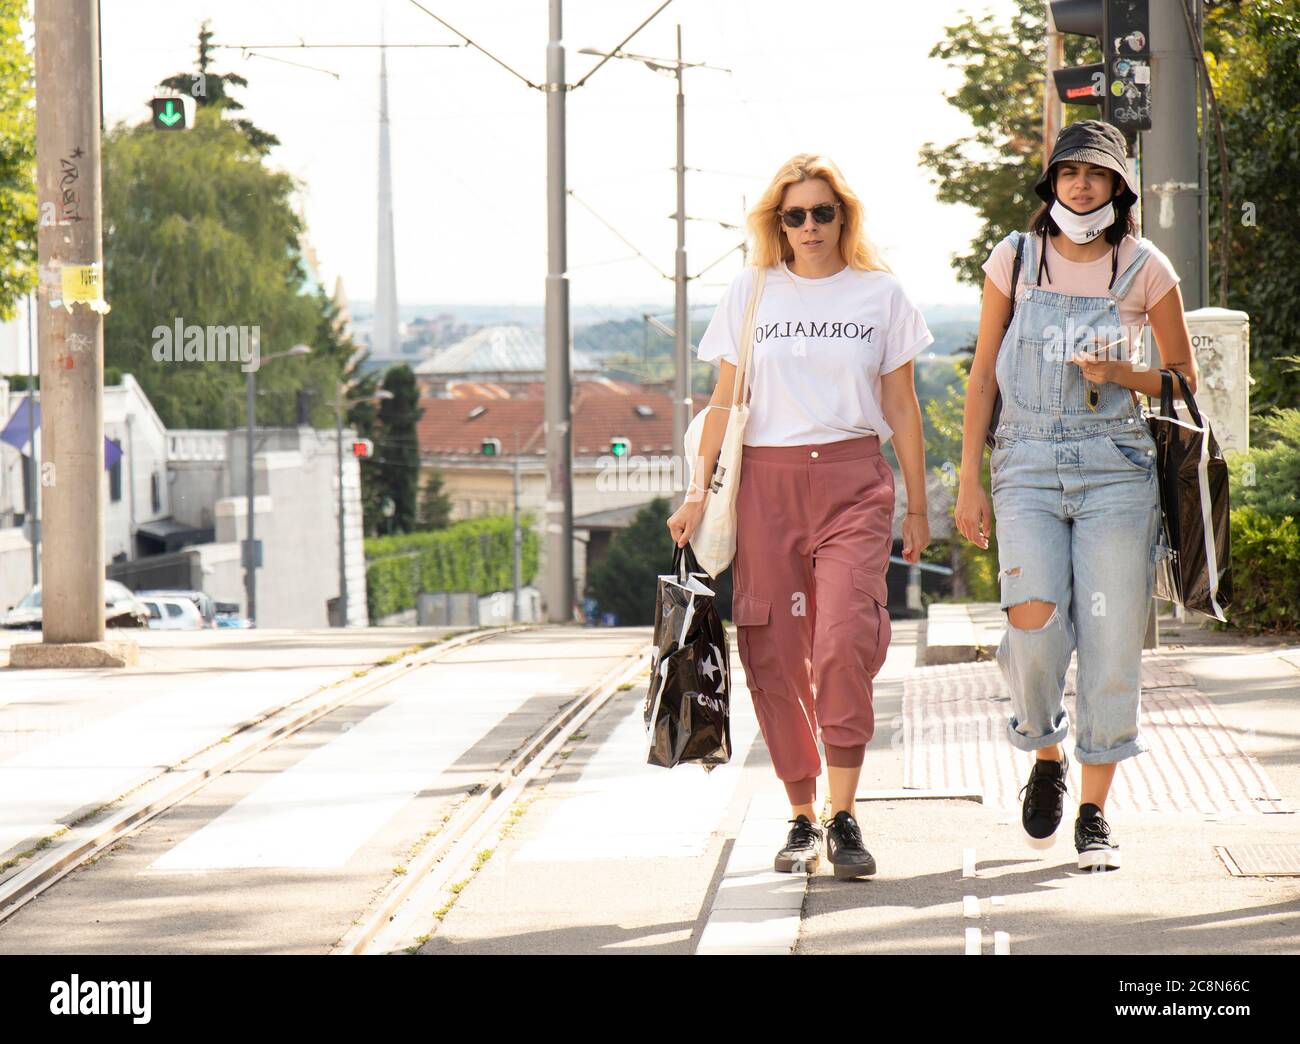 Belgrade, Serbia - July 16, 2020: Two young women casualy dressed in urban street style walking down the street Stock Photo